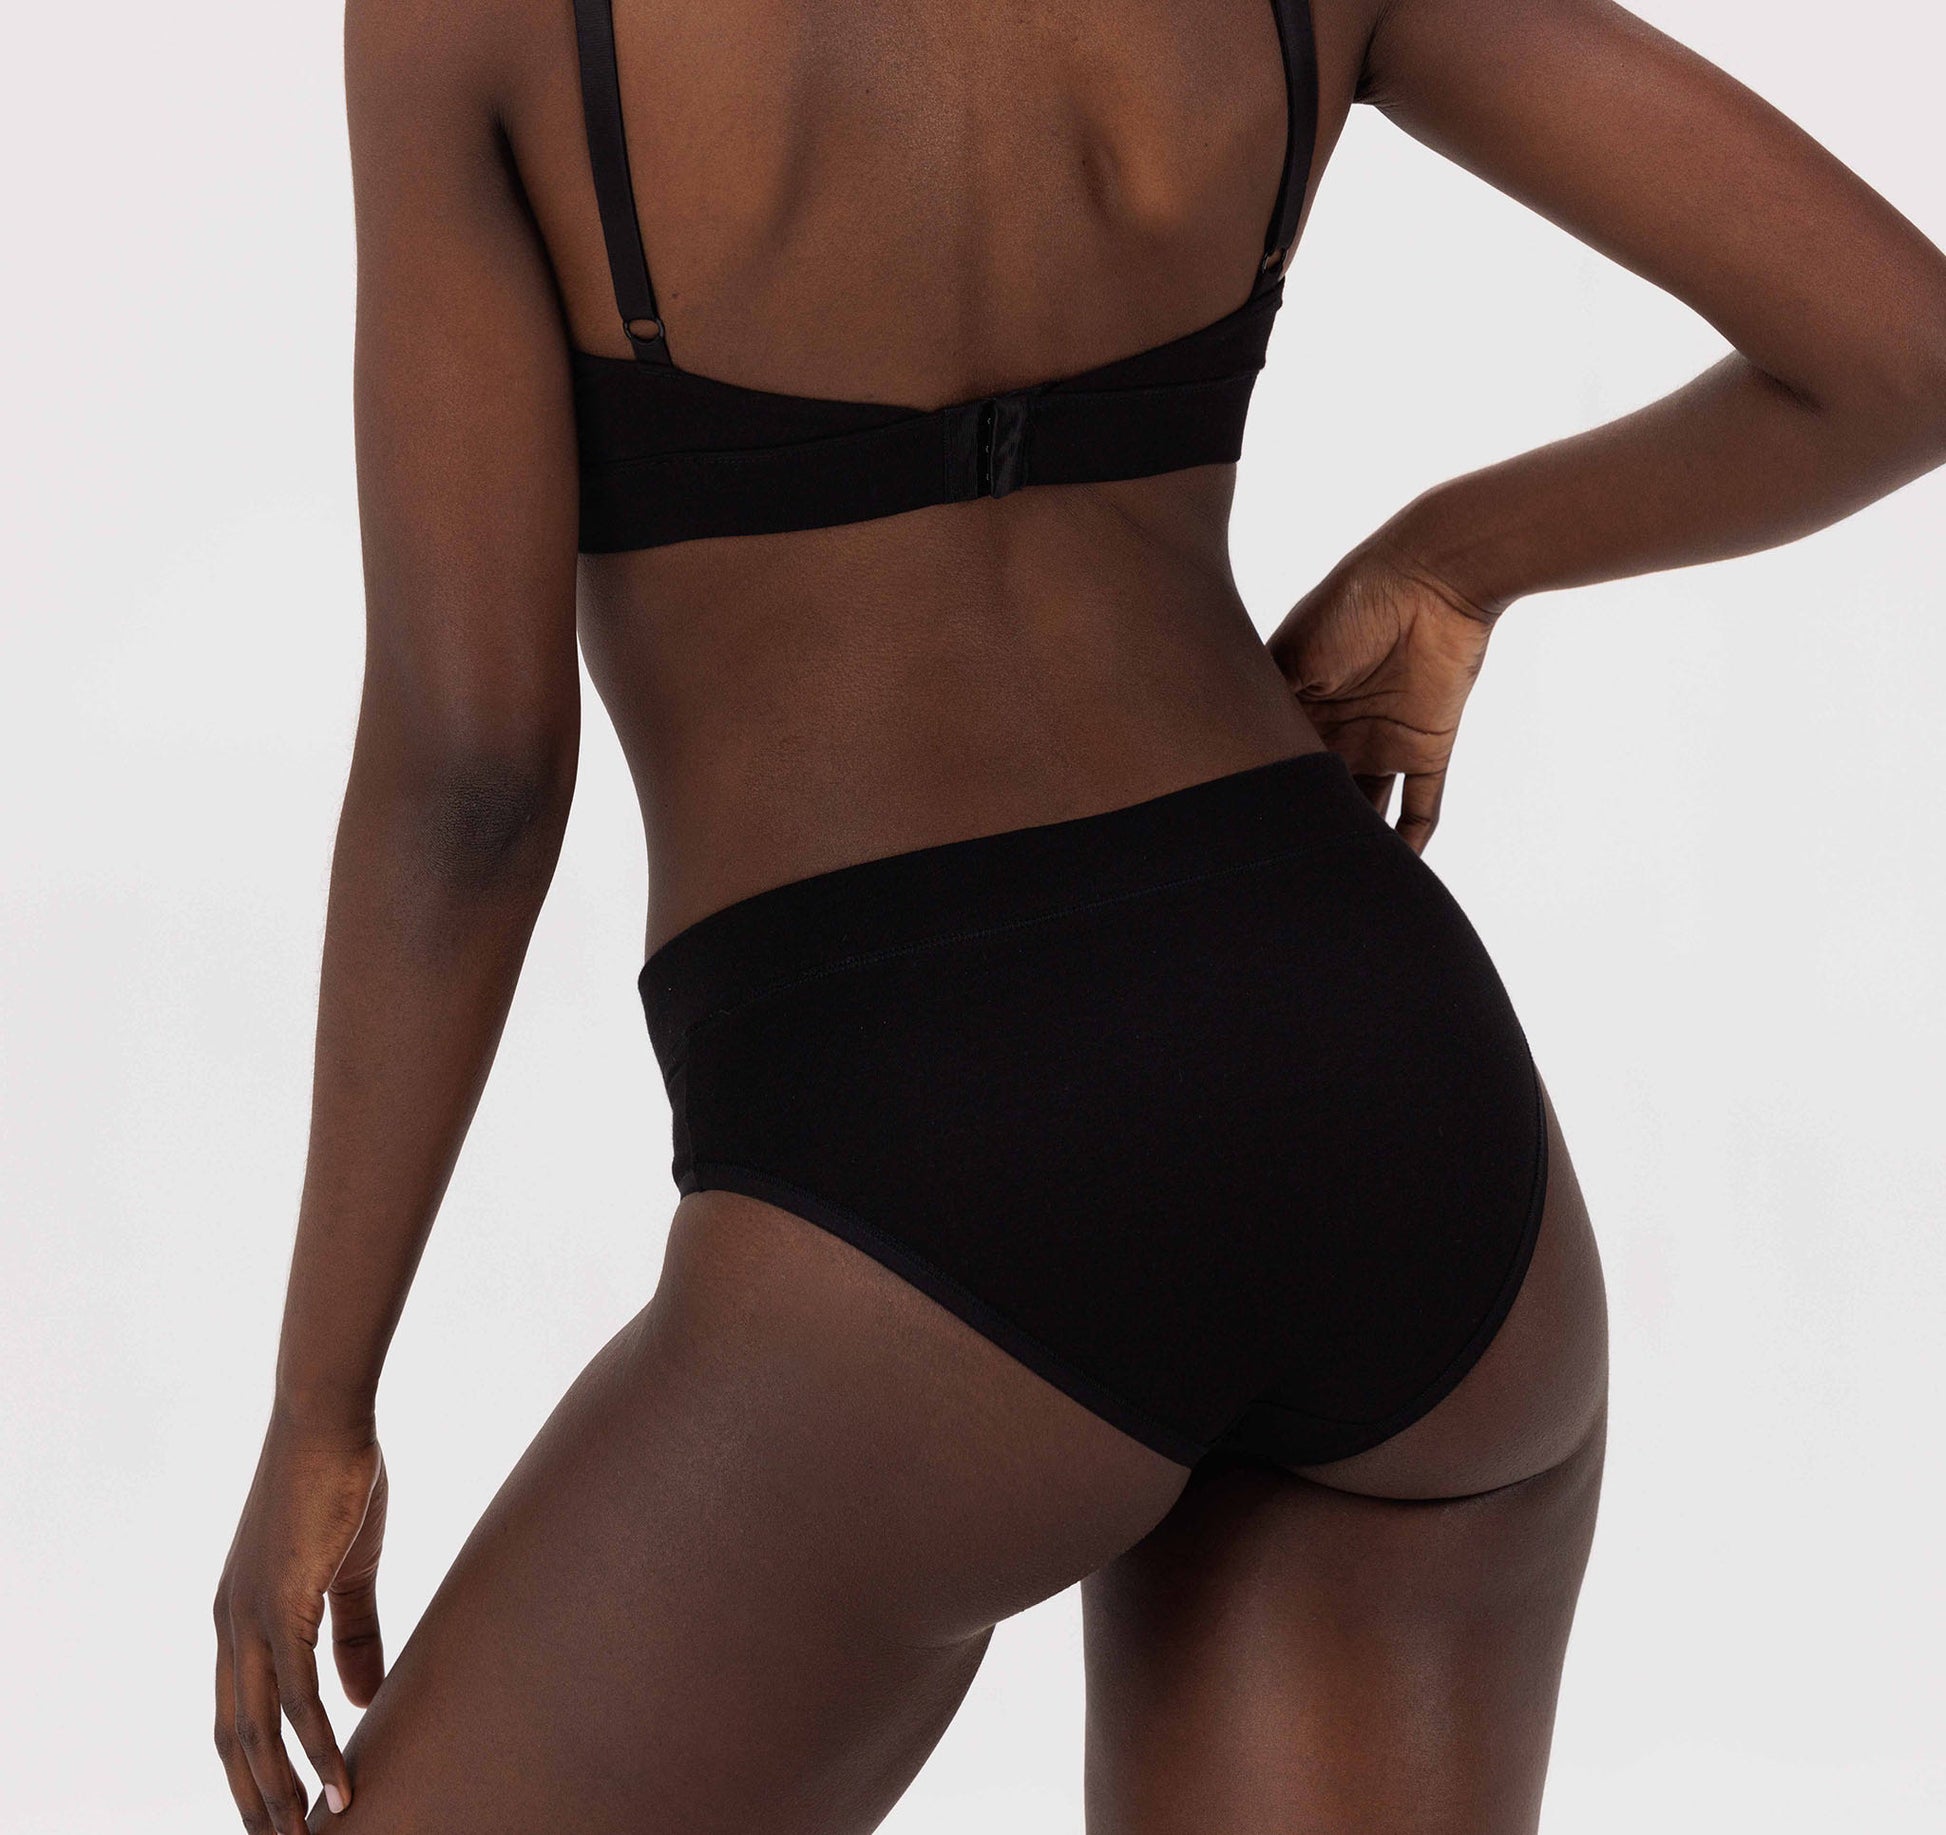  Organic Signatures Womens Bikini Briefs Cotton Underwear, Soft,  Comfy, Ethical (Small. Black) : Clothing, Shoes & Jewelry